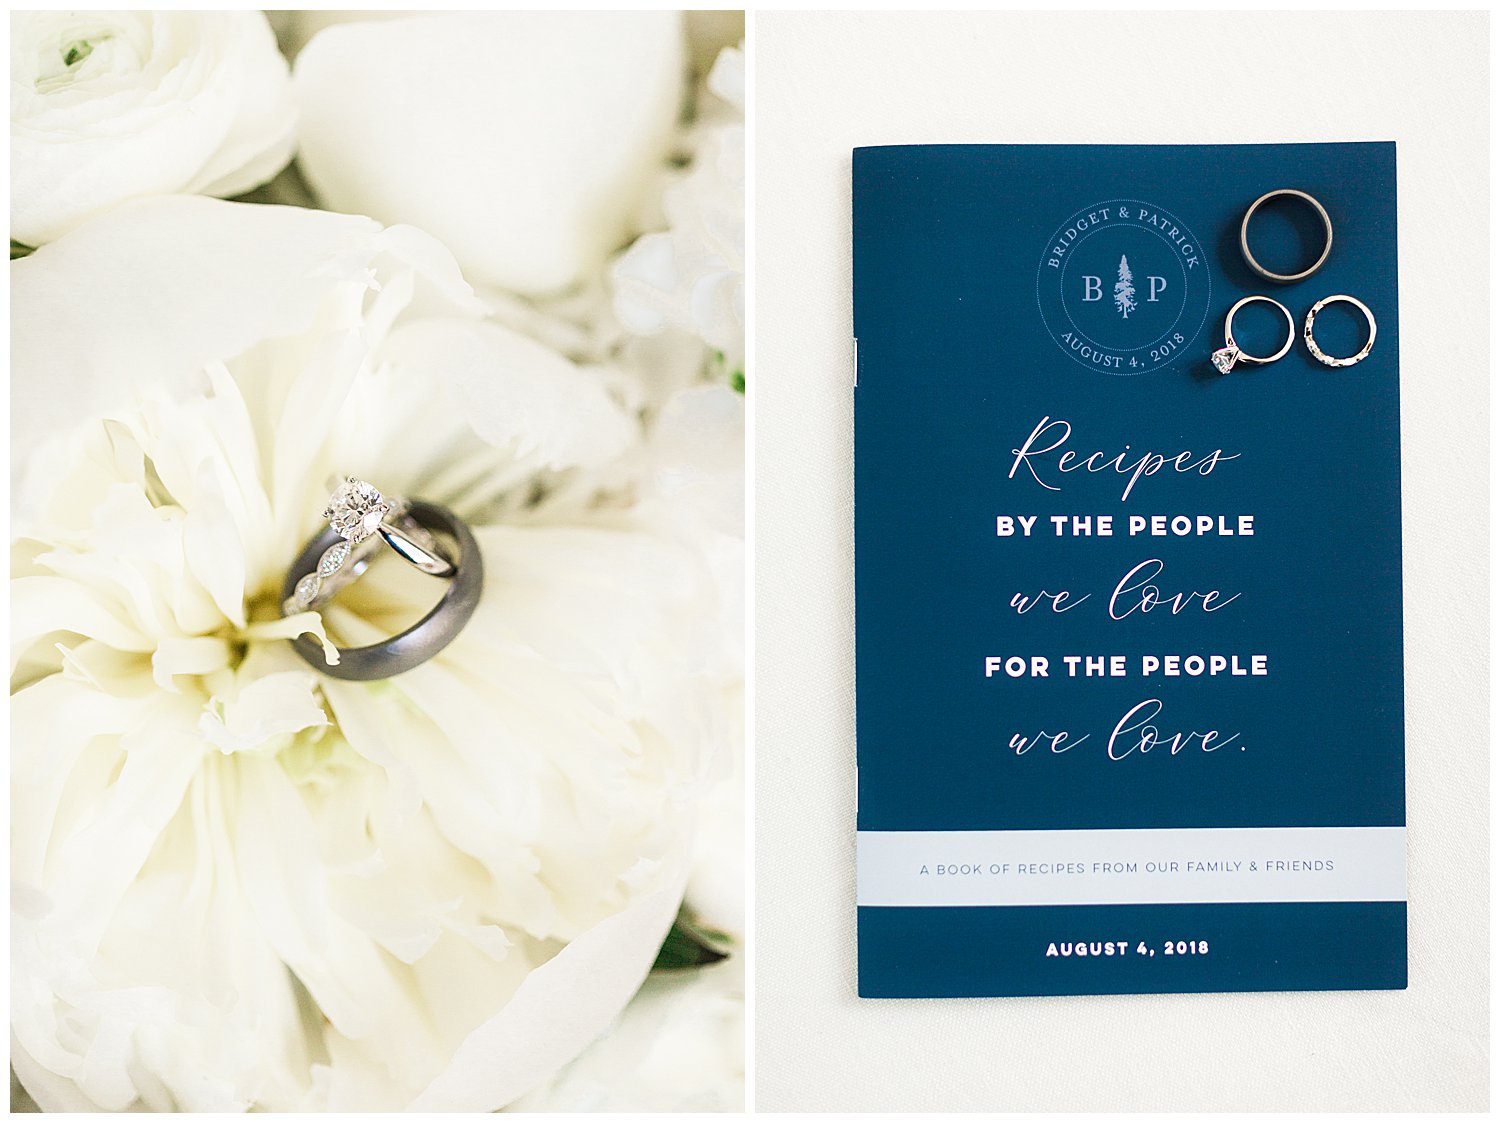 Bridal details rings and recipe book